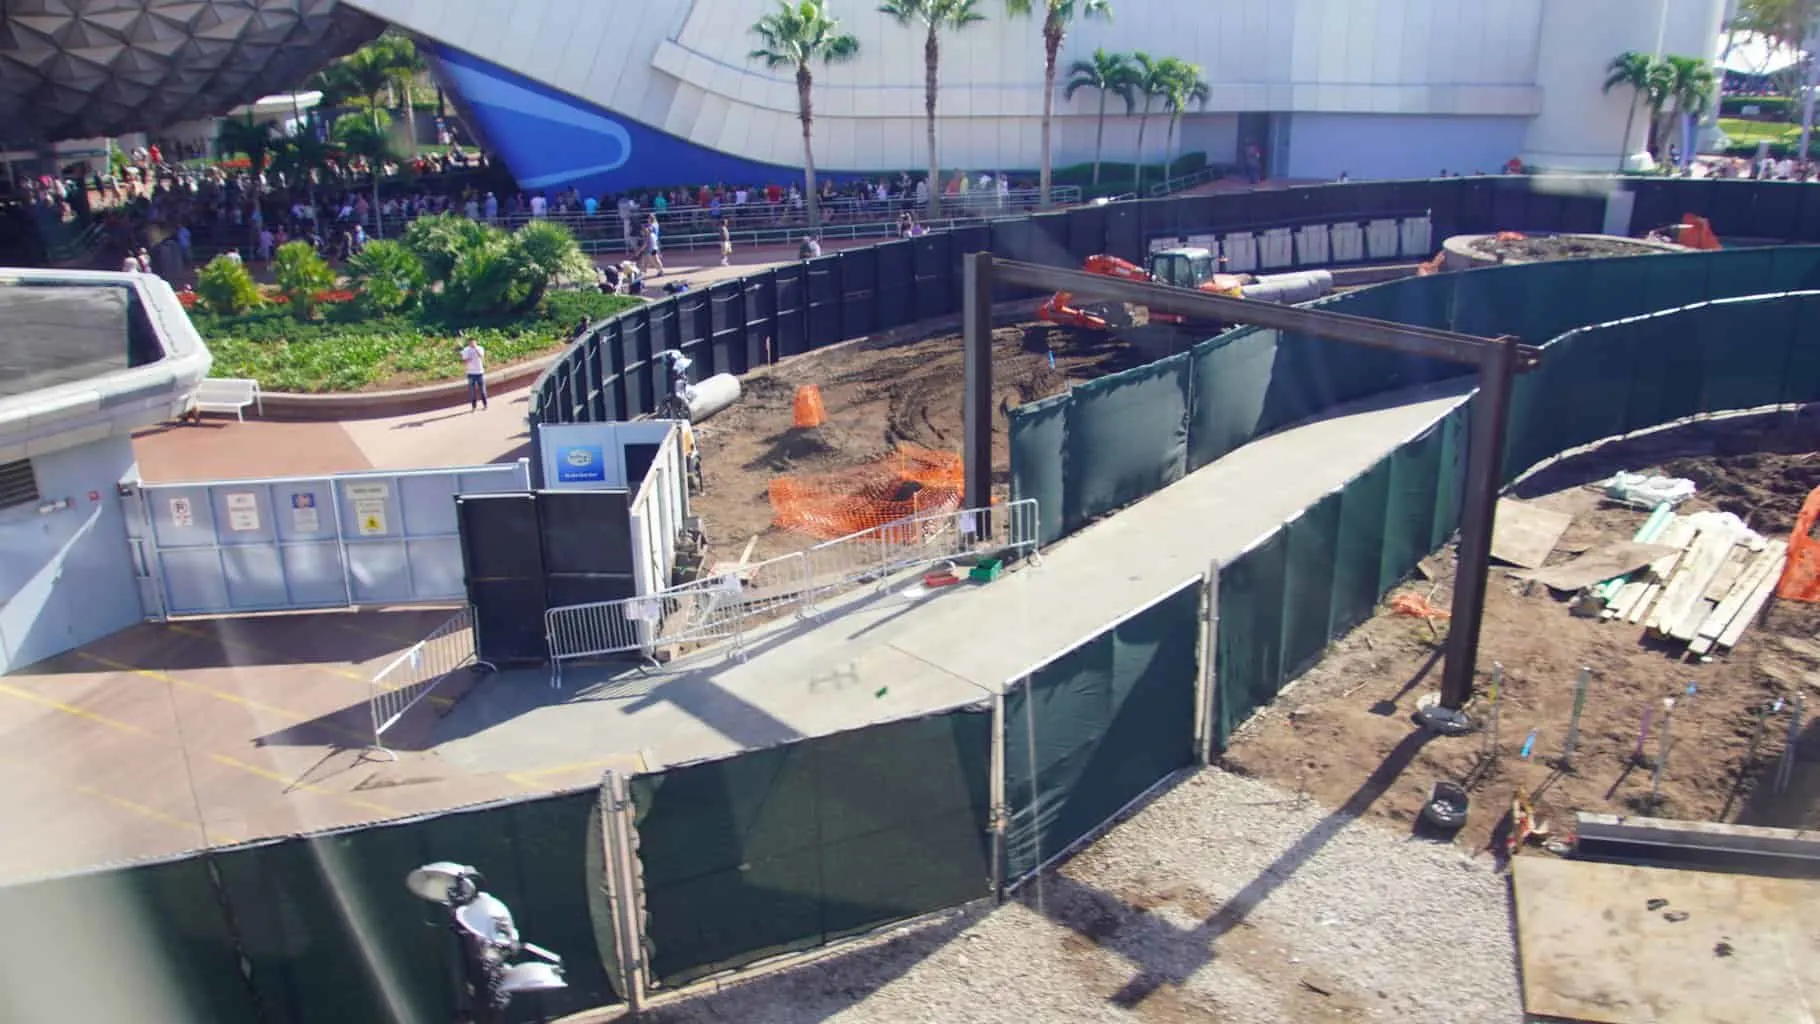 New path Innoventions West Demolition Epcot Construction Updates November 2019